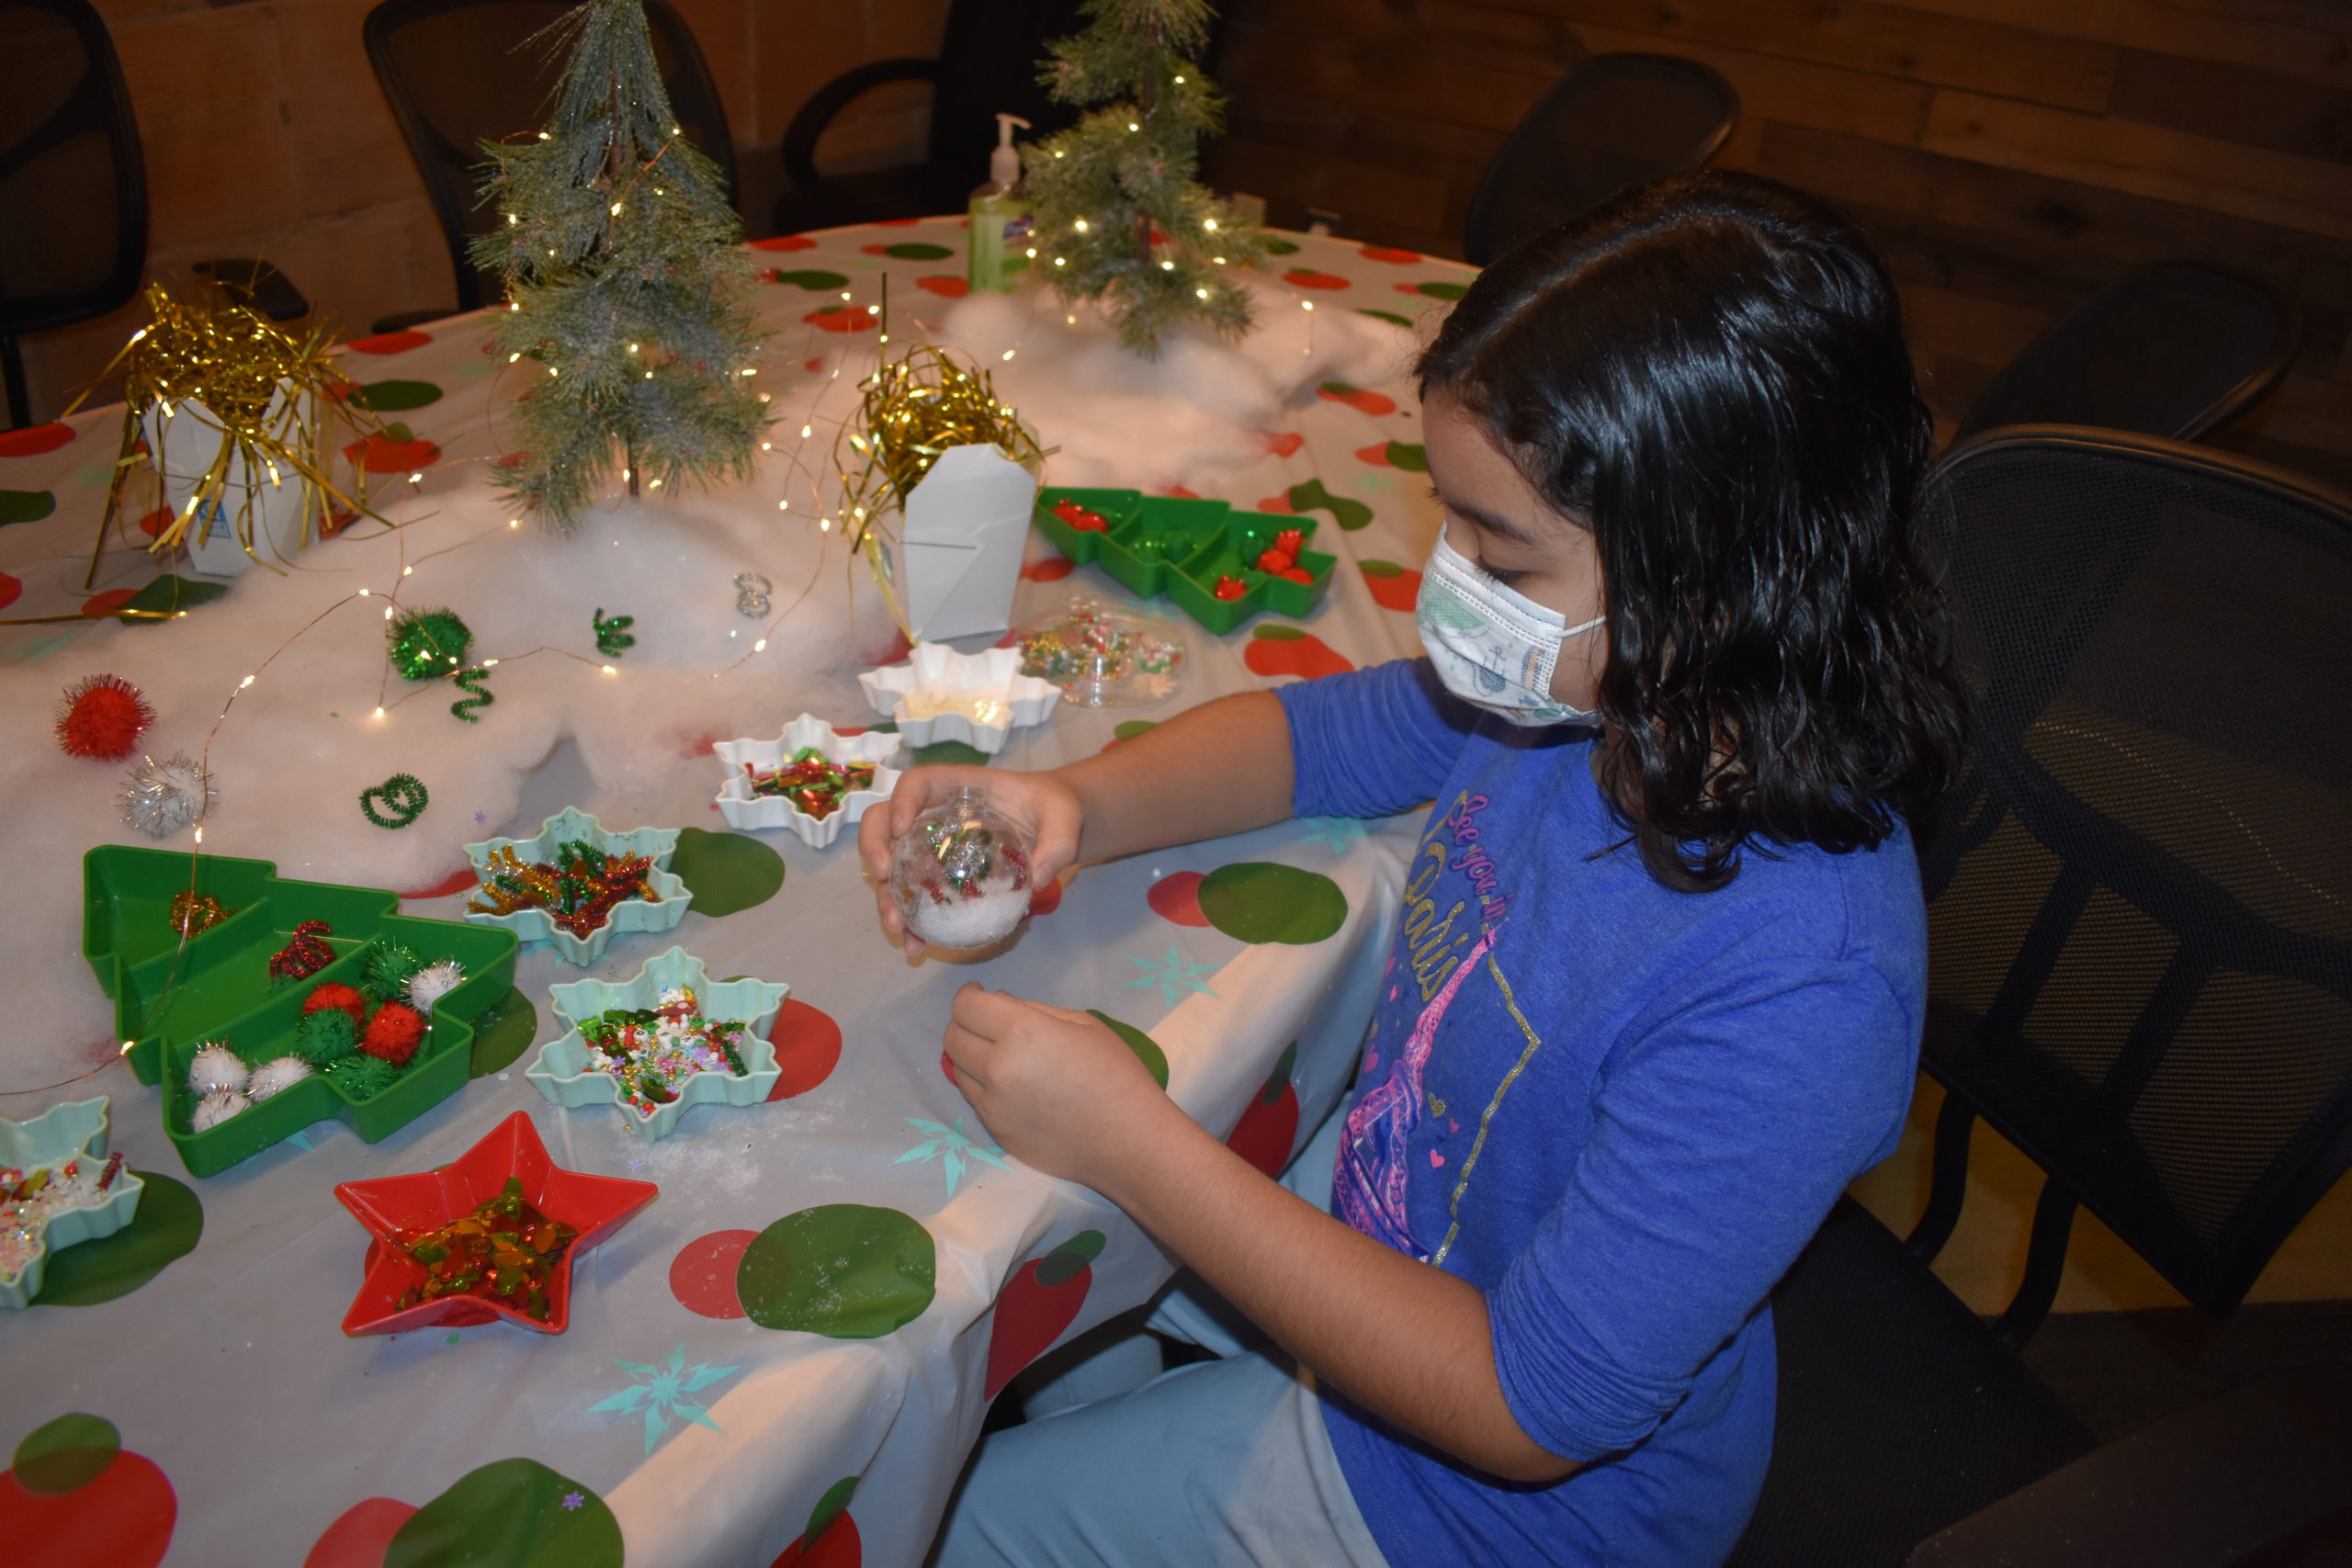 A girl sitting at a table making a craft at a holiday party